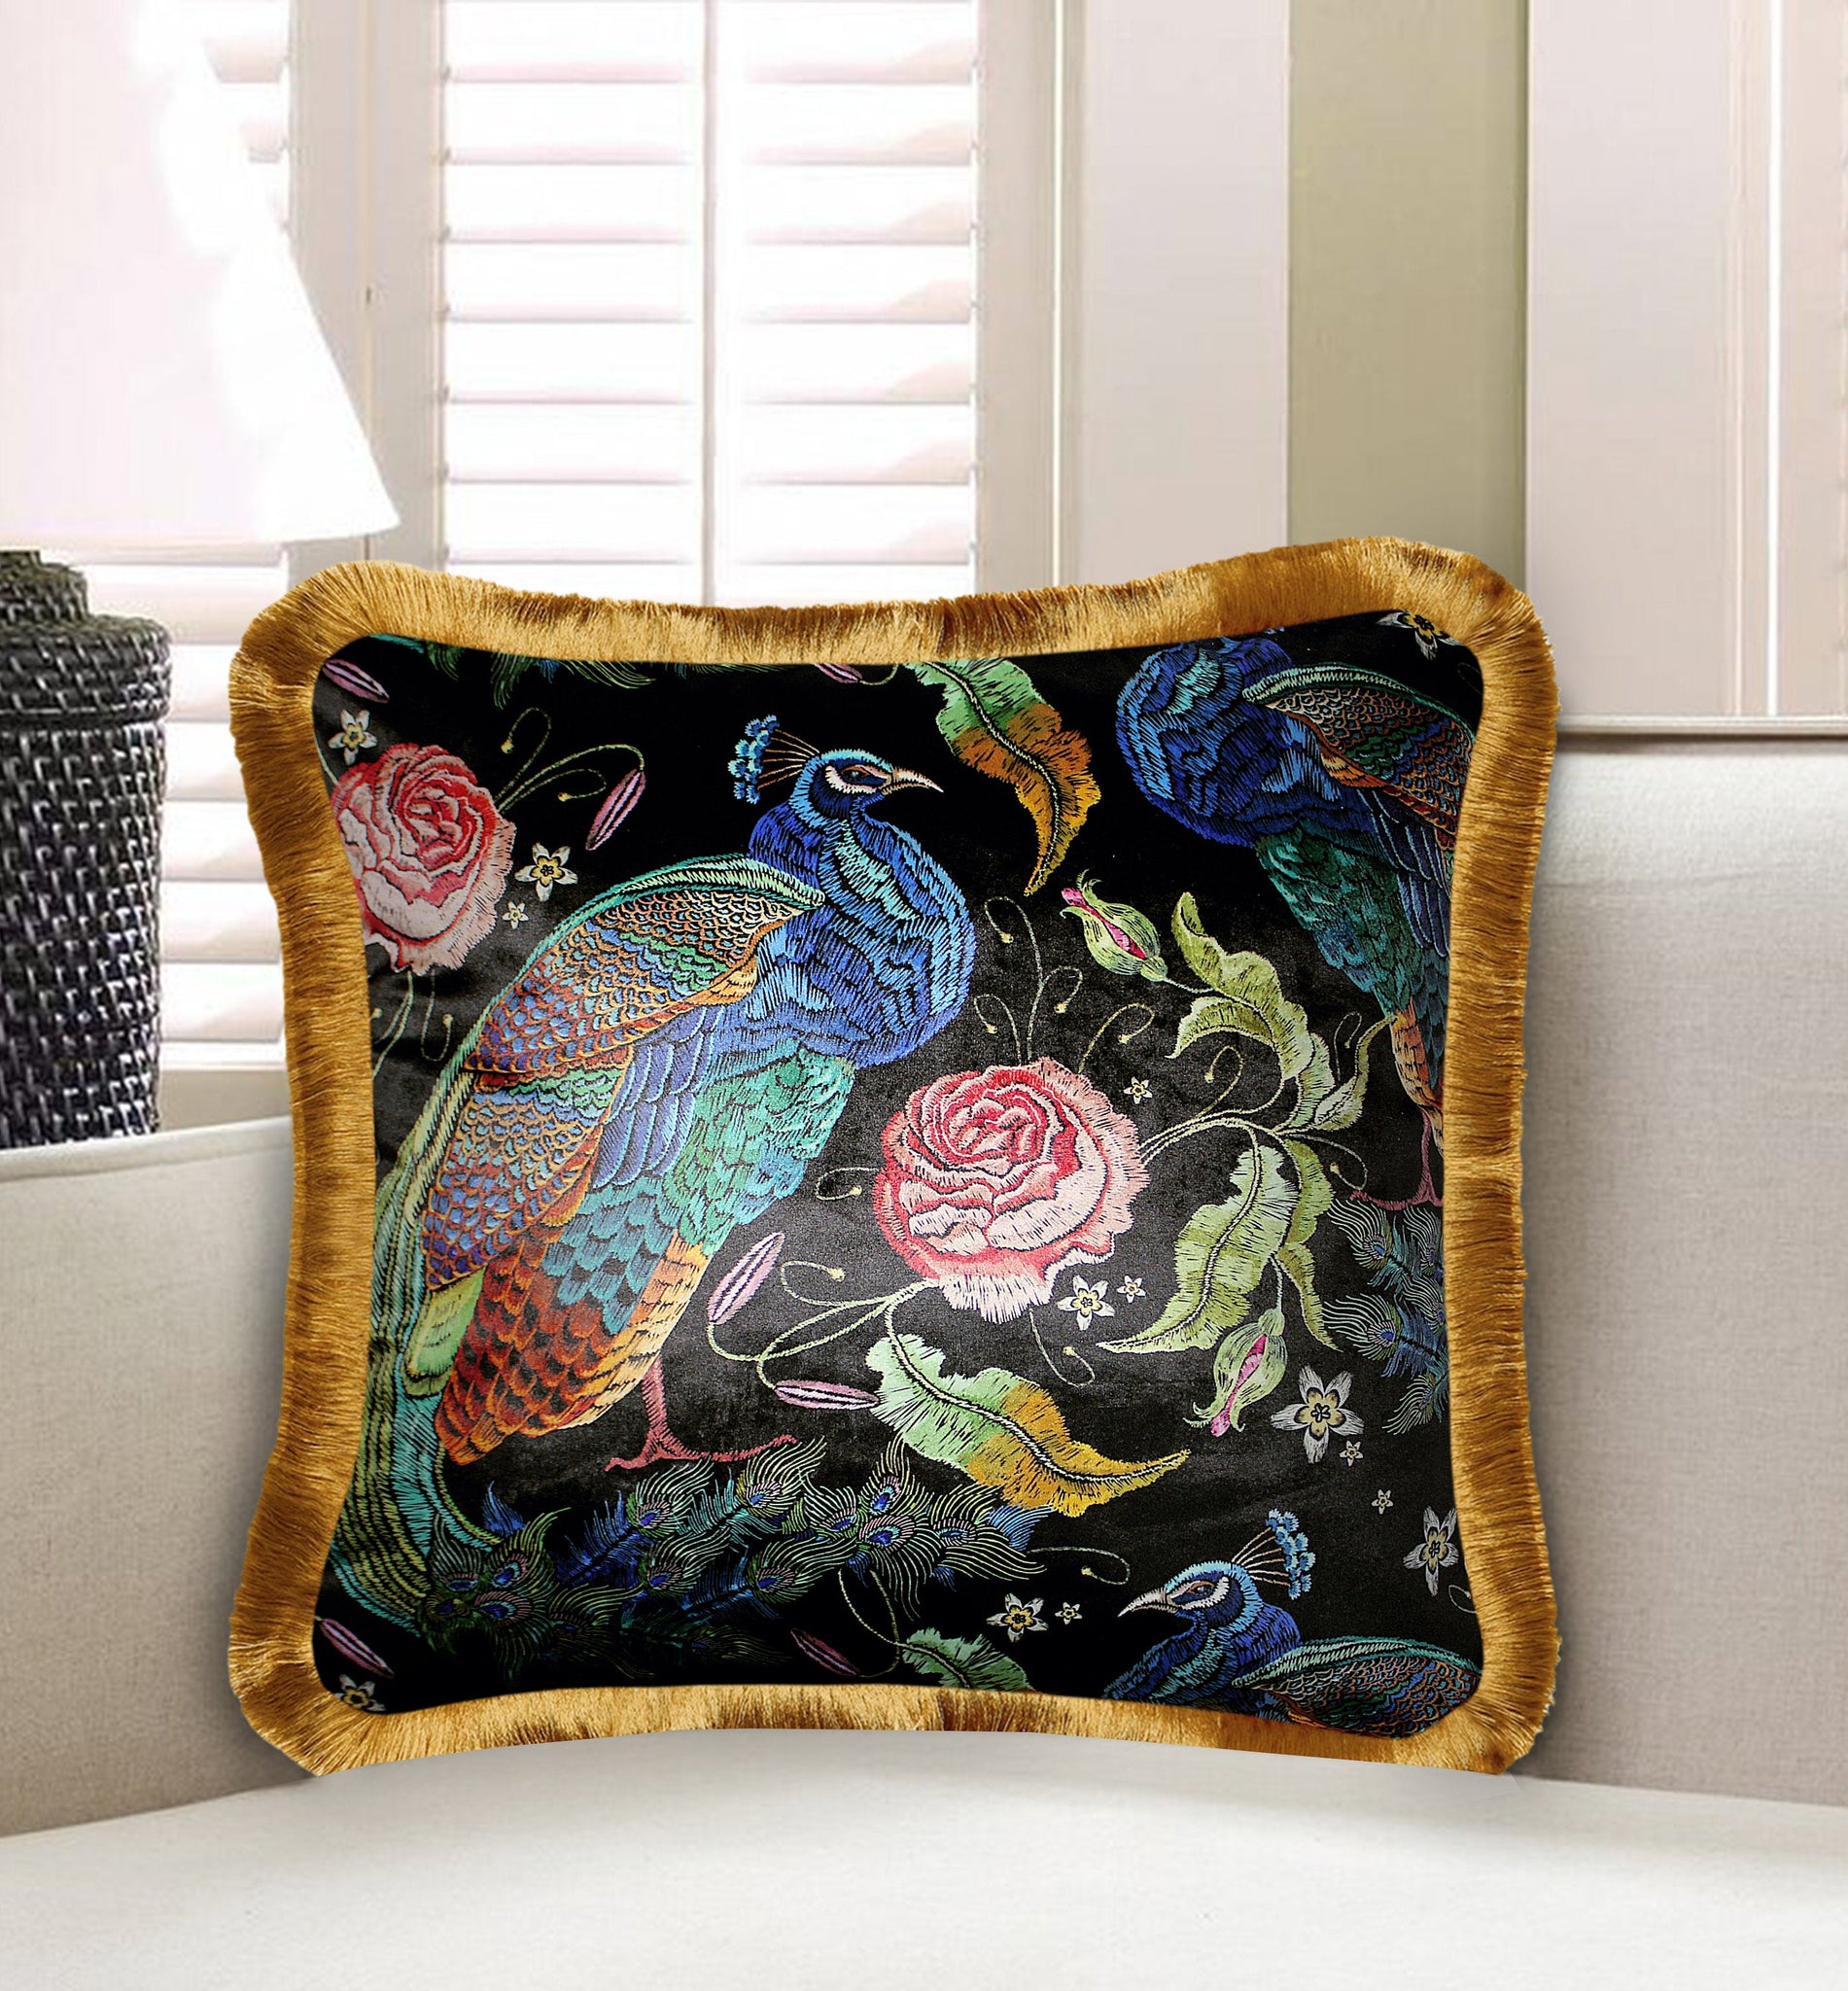  Velvet Cushion Cover Embroidery Imitated Rose and Peacock Decorative pillowcase, Flower and Exotic Animal Décor Throw Pillow for Sofa Chair Bedroom Living Room Multi Color 45x45cm (18x18 Inches)